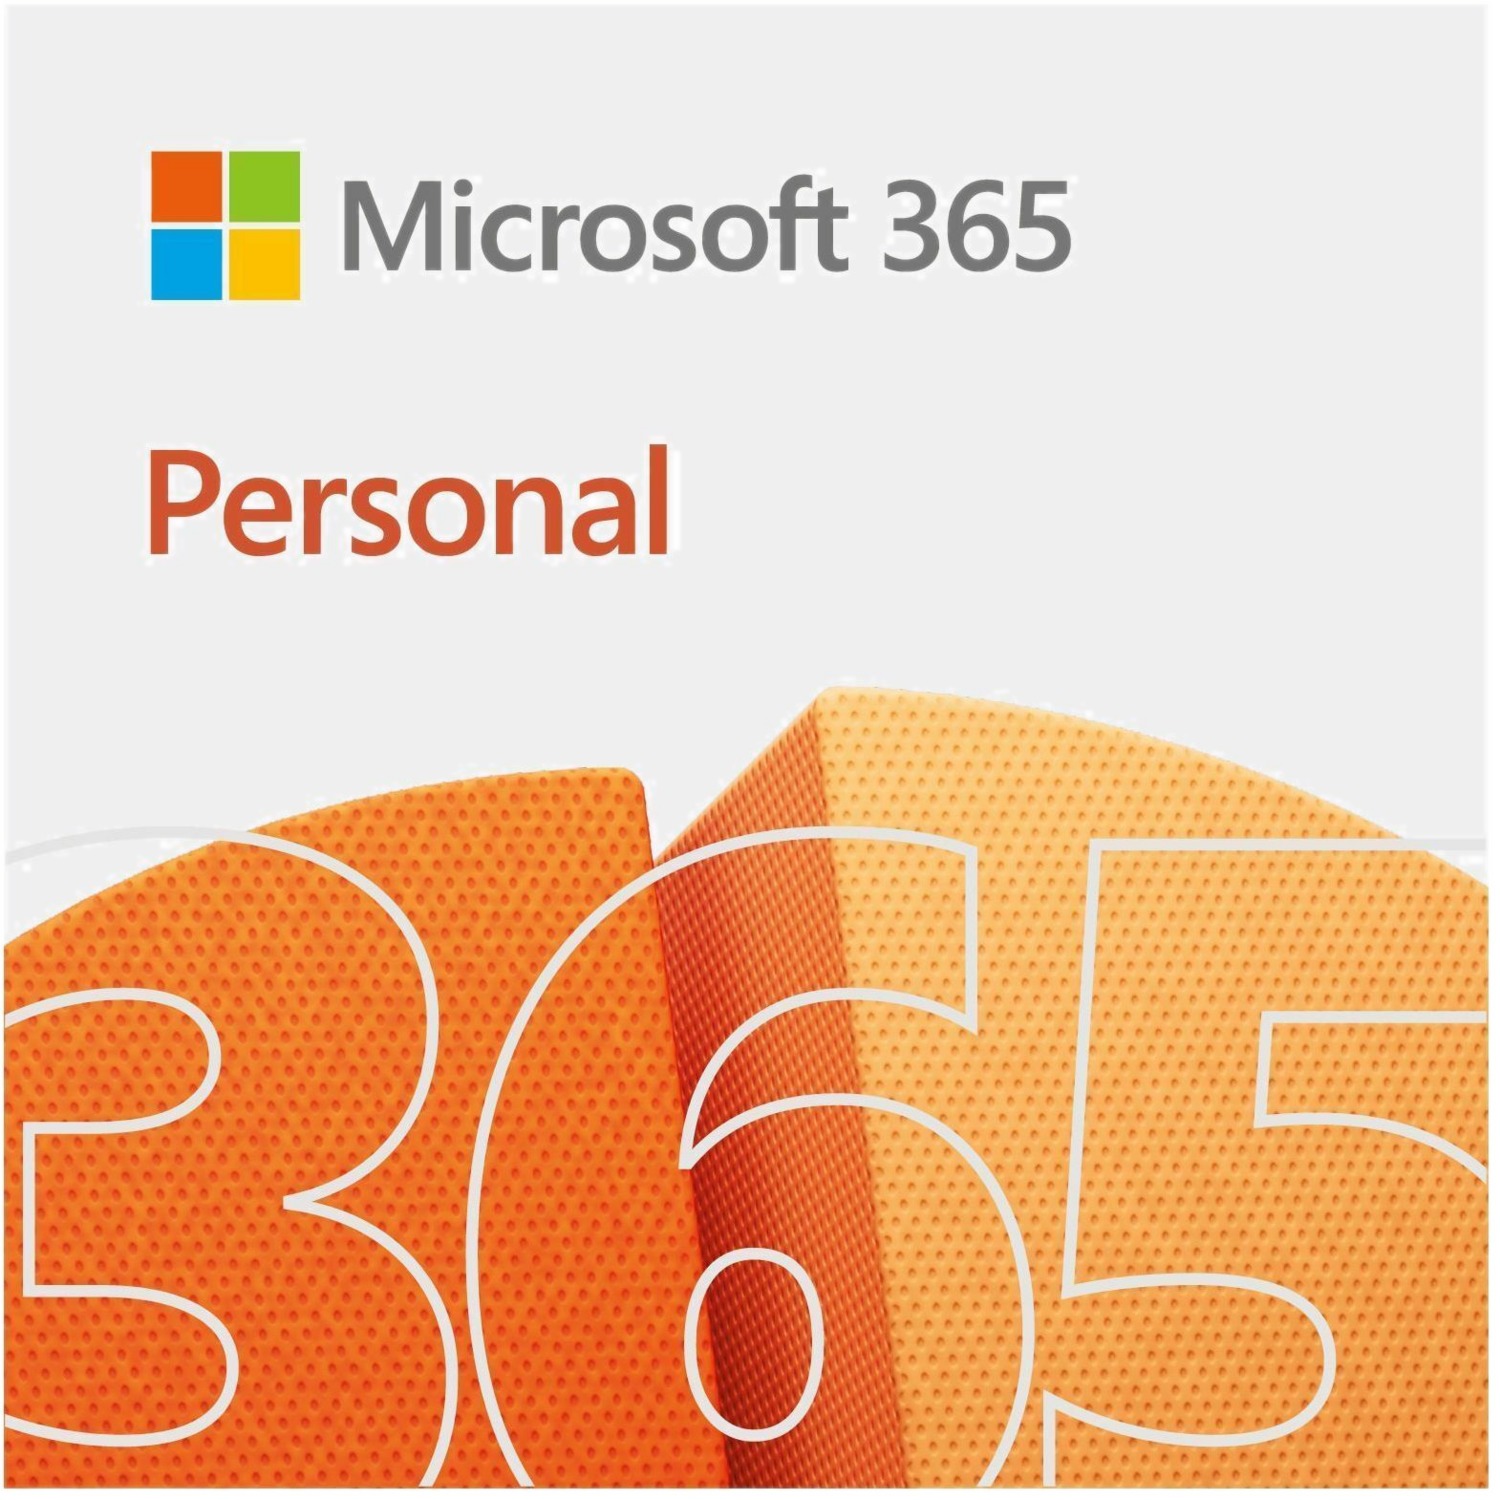 Microsoft 365 Personal - Subscription - 12 Month - Medialess $29.99